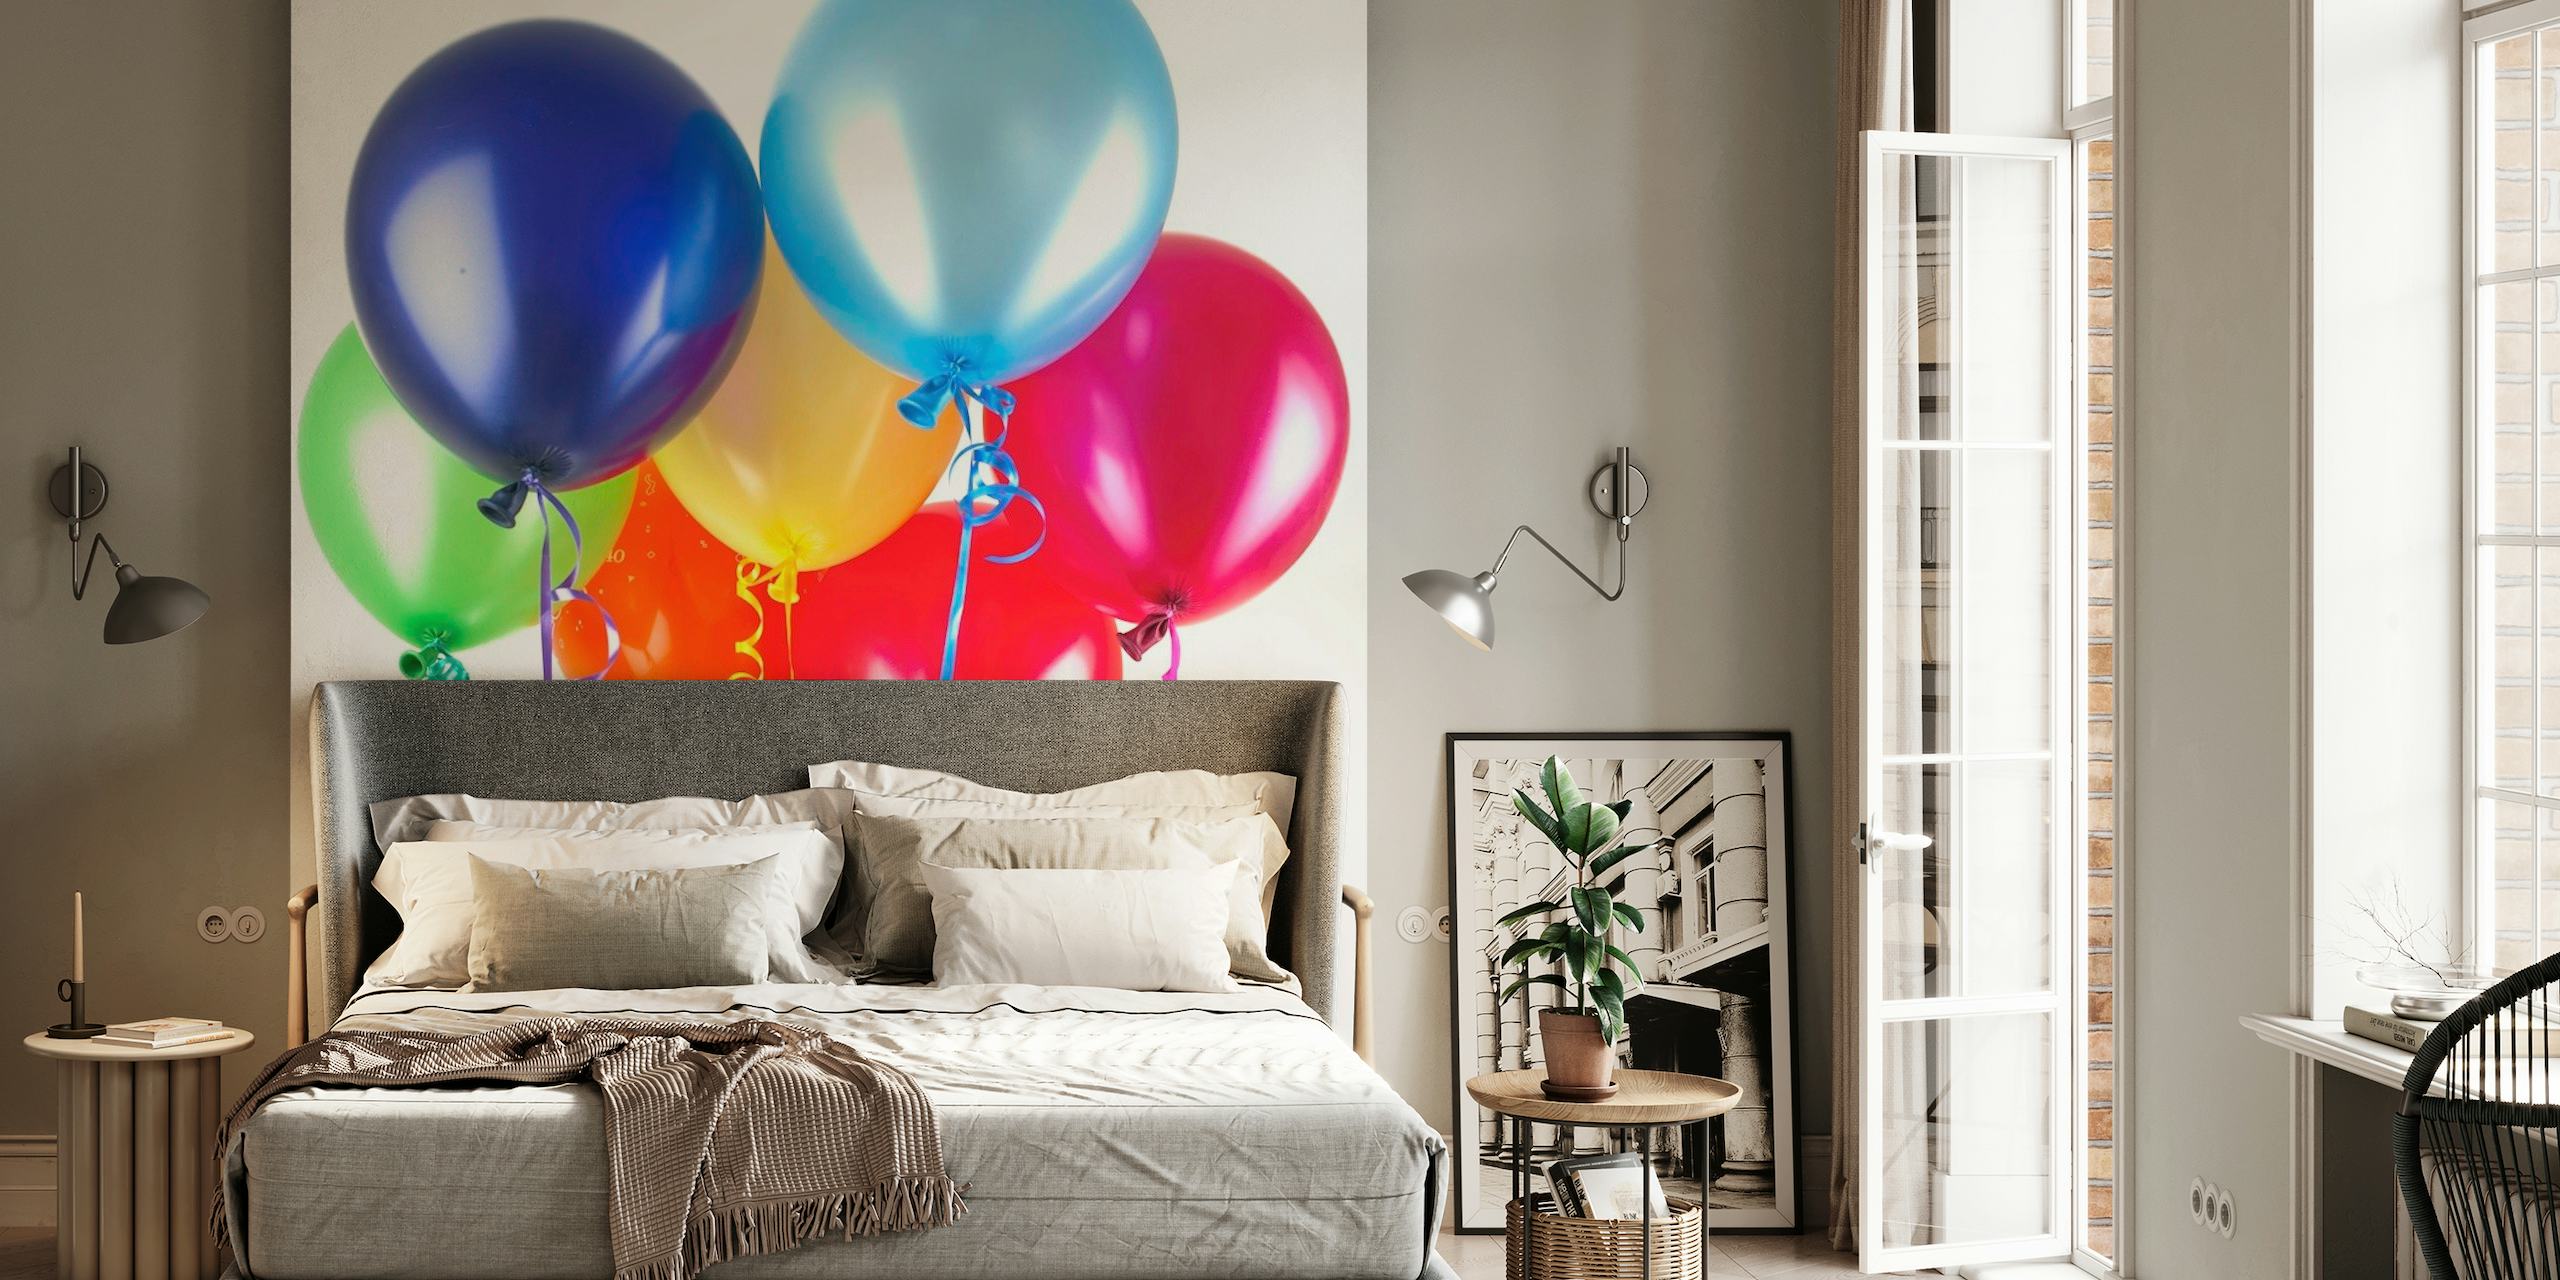 A vibrant array of colorful balloons in a wall mural